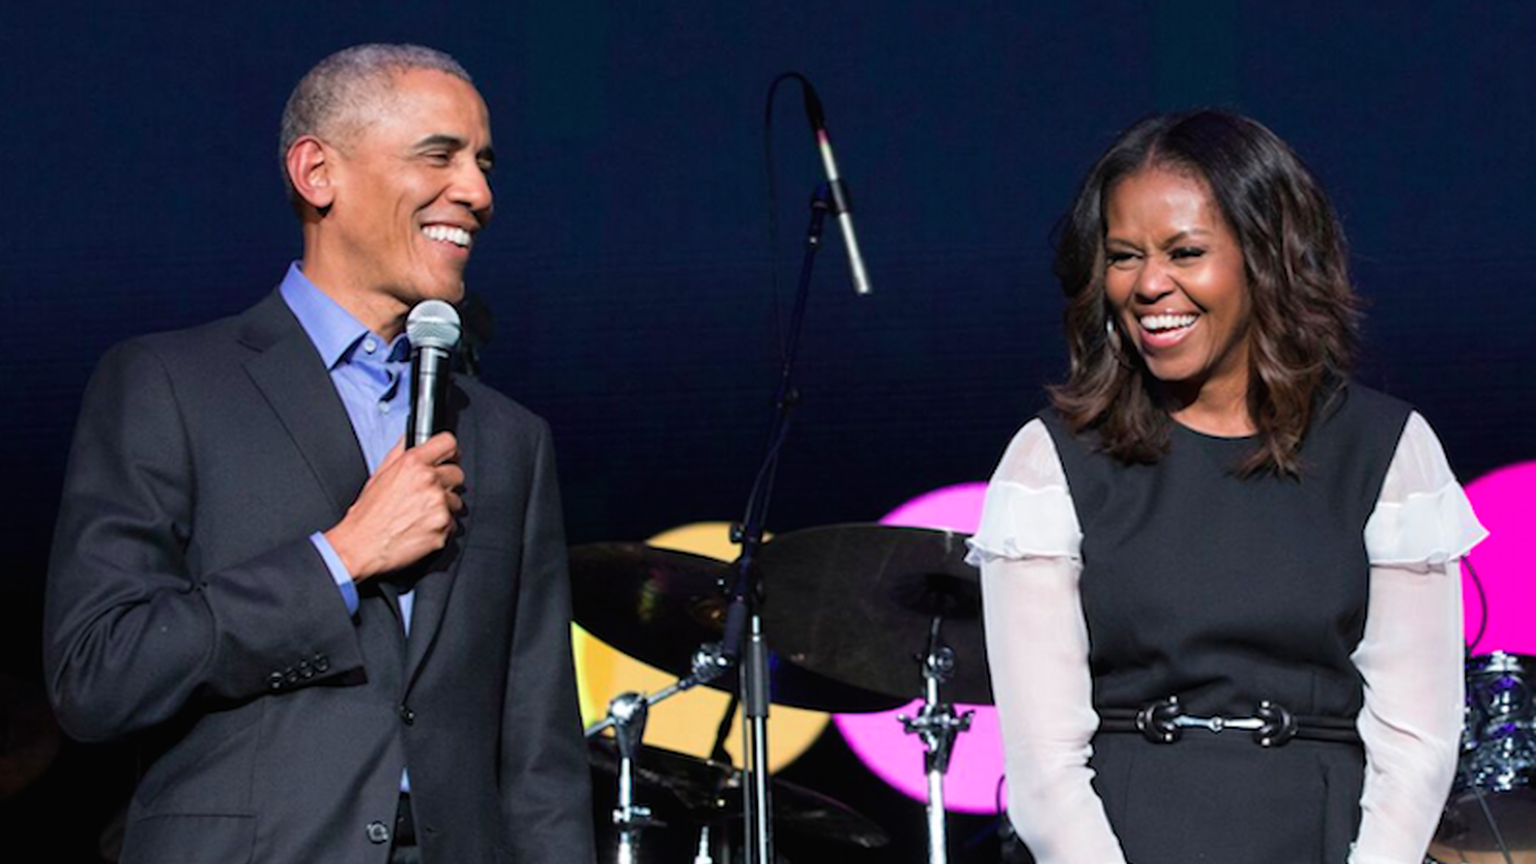 Obamas Are Top Speakers at YouTube’s ‘Class of 2020’ Virtual ...